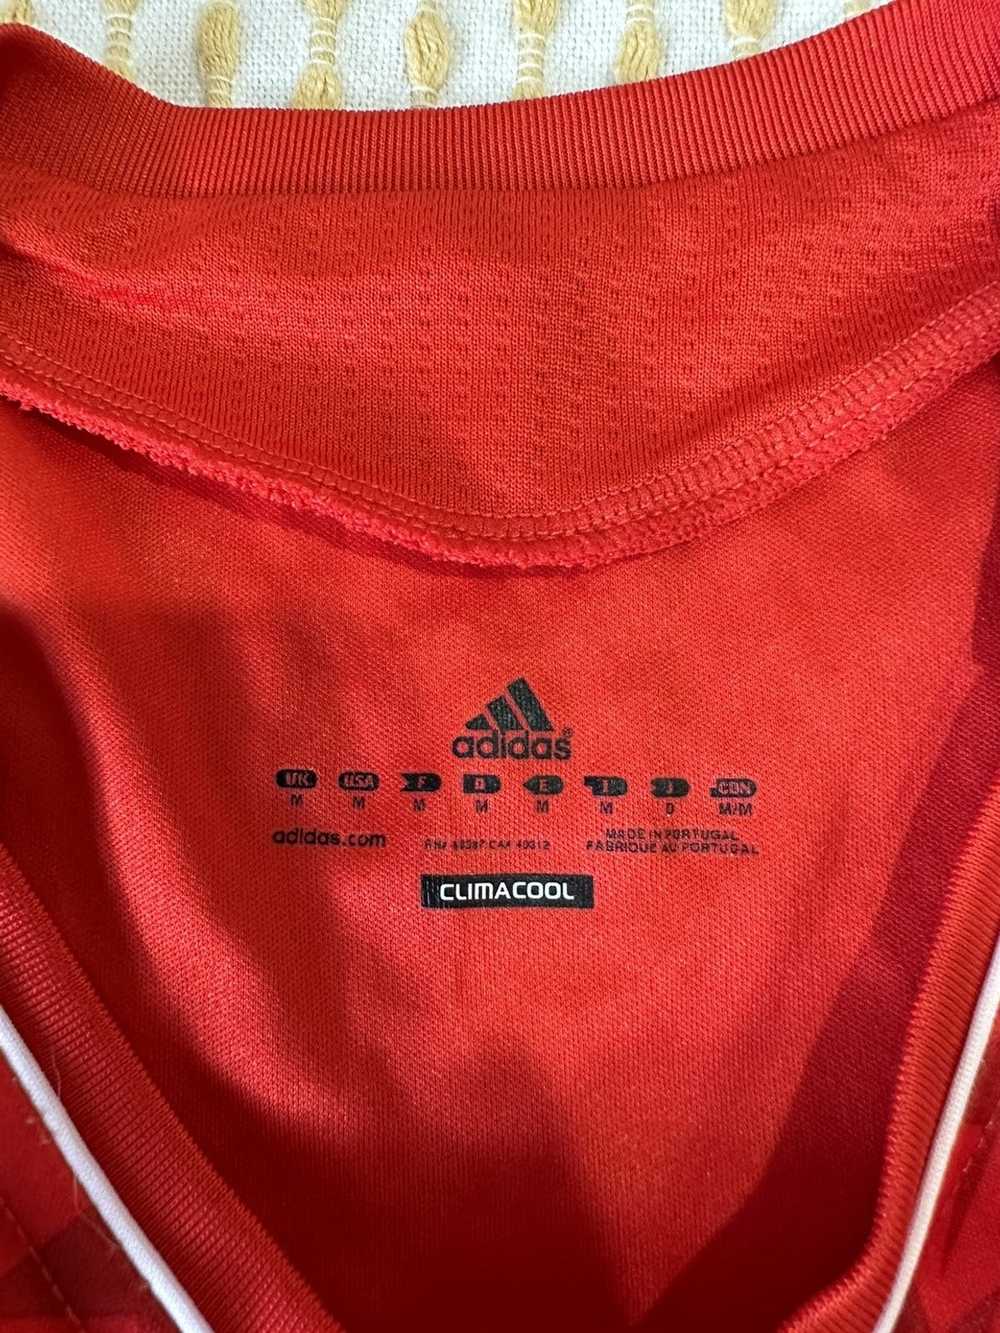 Adidas Vintage Soccer Jersey - Russia - image 3